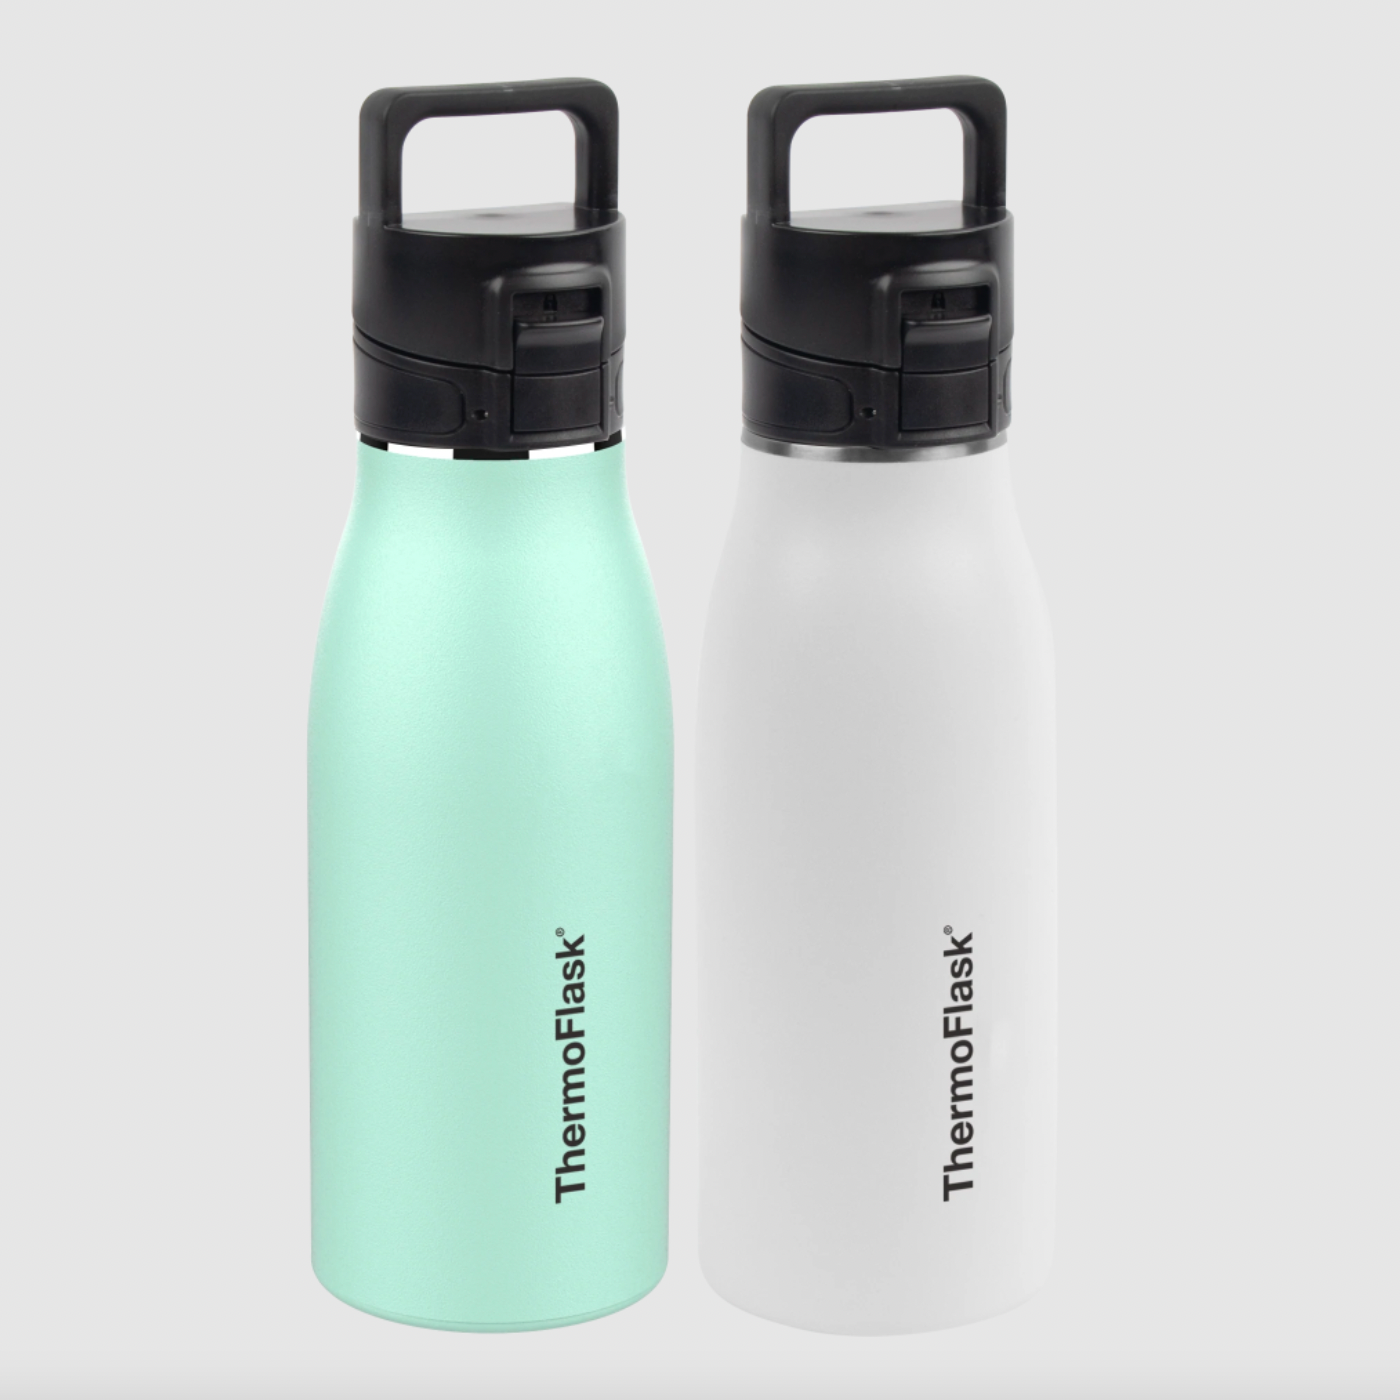 Thermoflask 24 oz. Stainless Steel Water Bottle Set, 2-pack